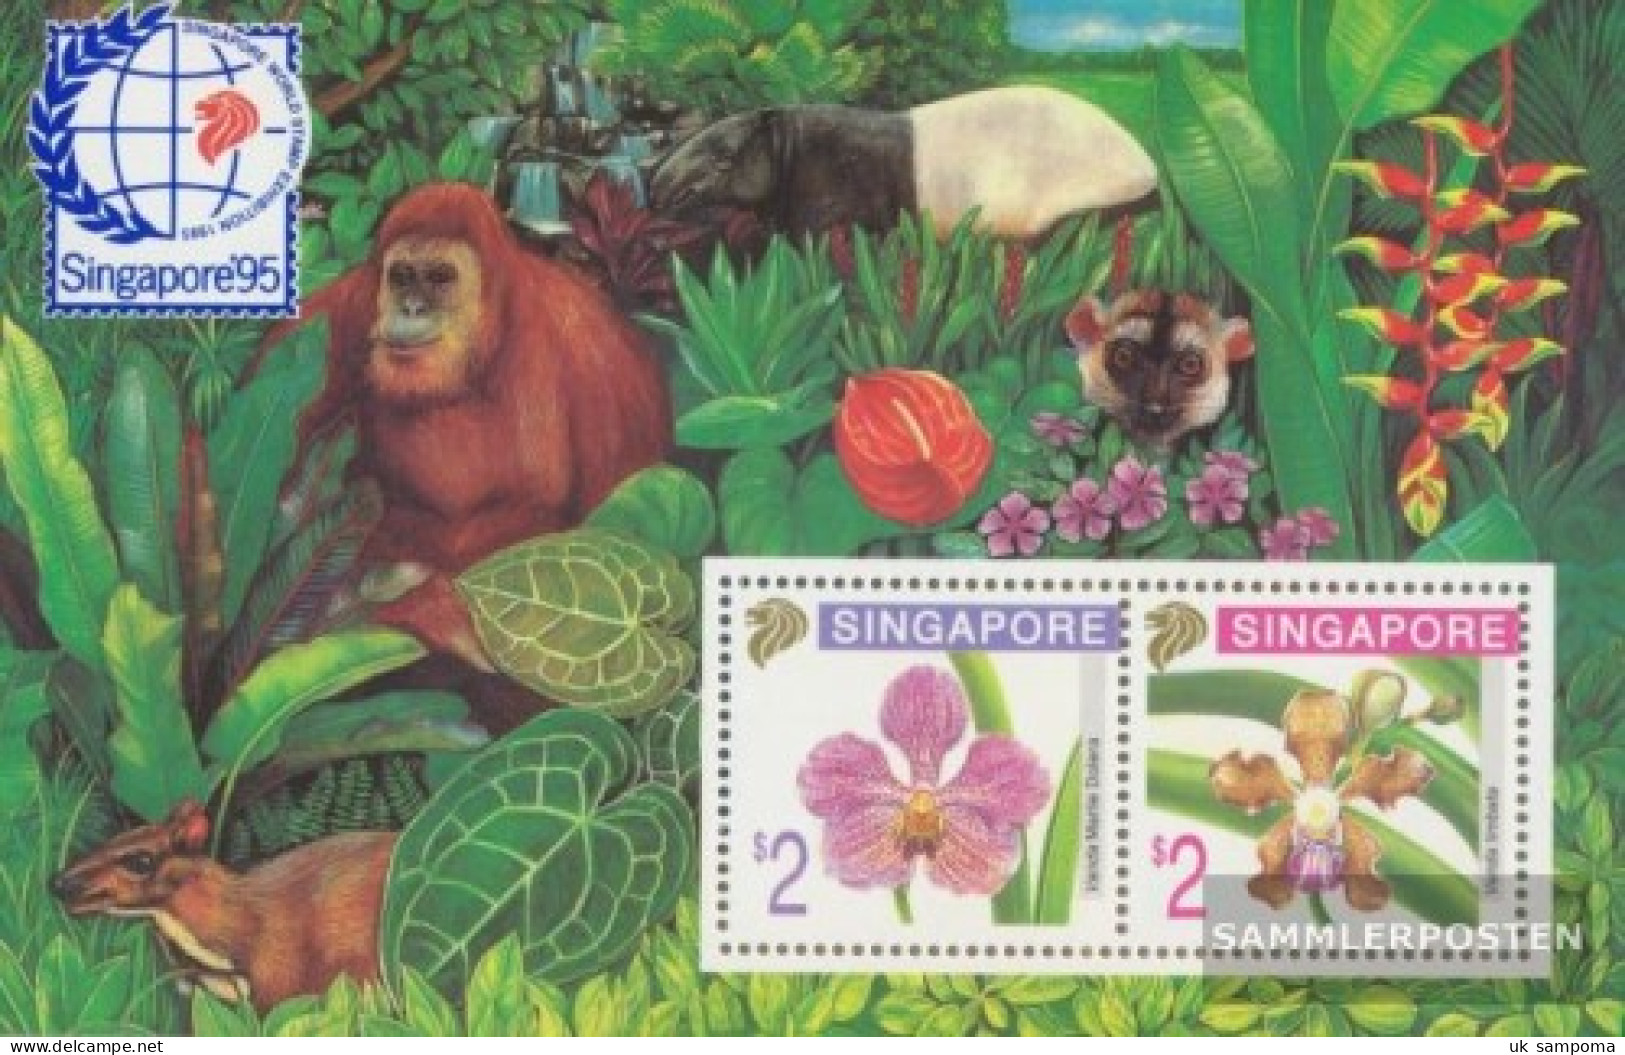 Singapore Block33a (complete Issue) Unmounted Mint / Never Hinged 1995 Orchids - Orang-Utan, Tapir - Singapore (1959-...)